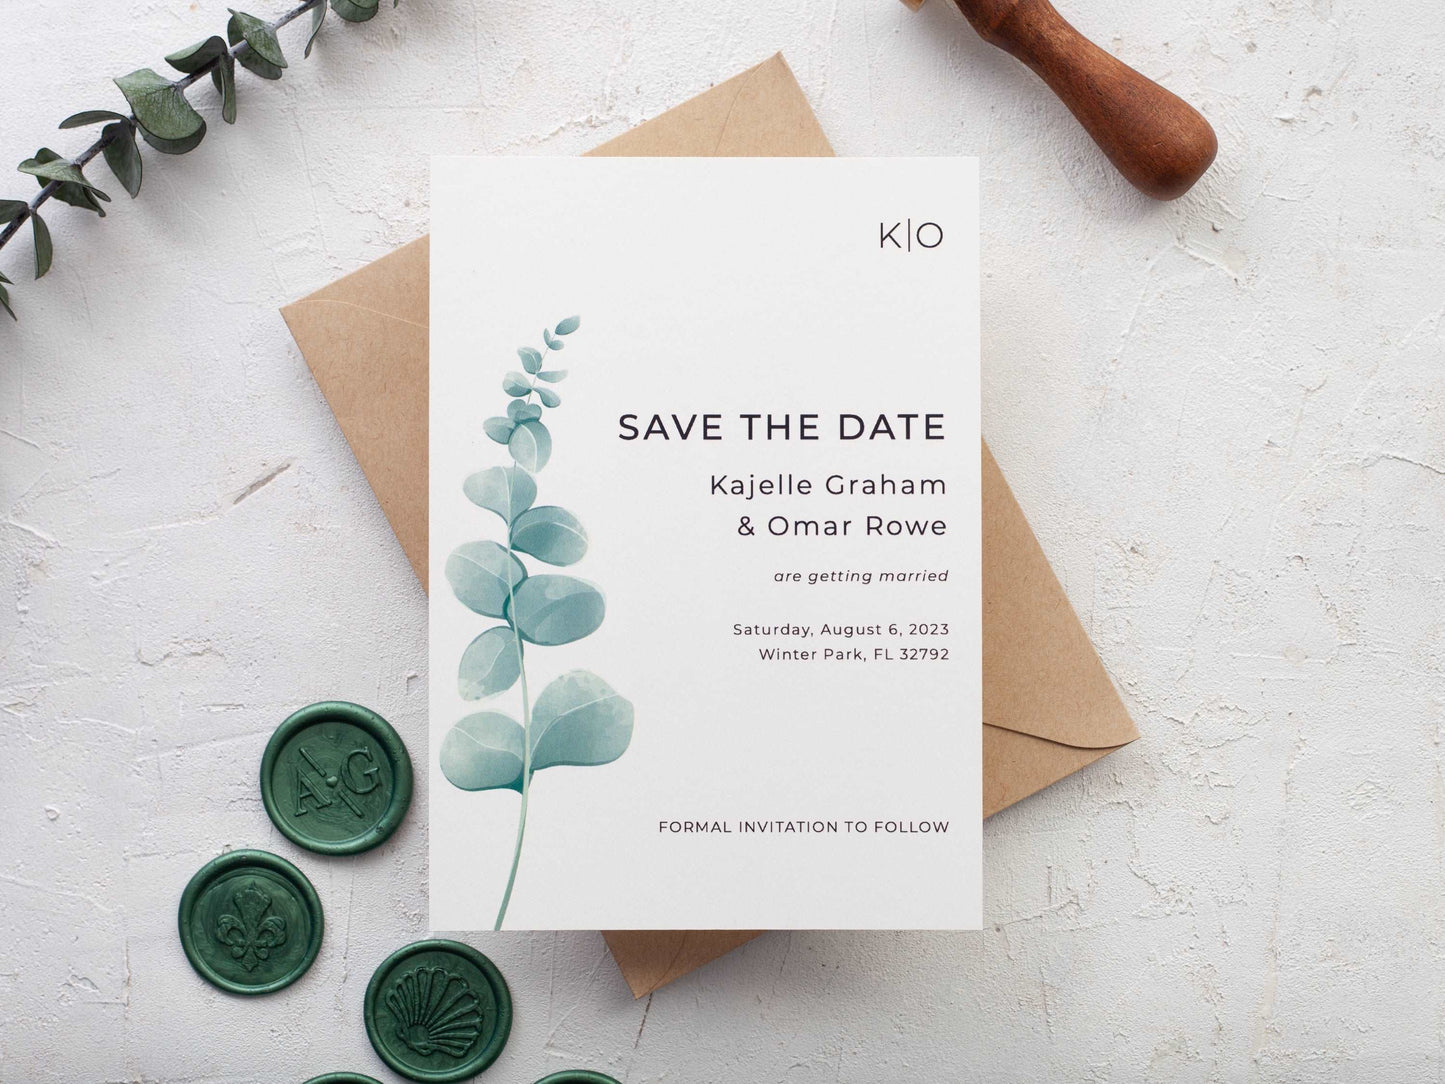 Greenery Save the Date Card with Eucalyptus Leaves